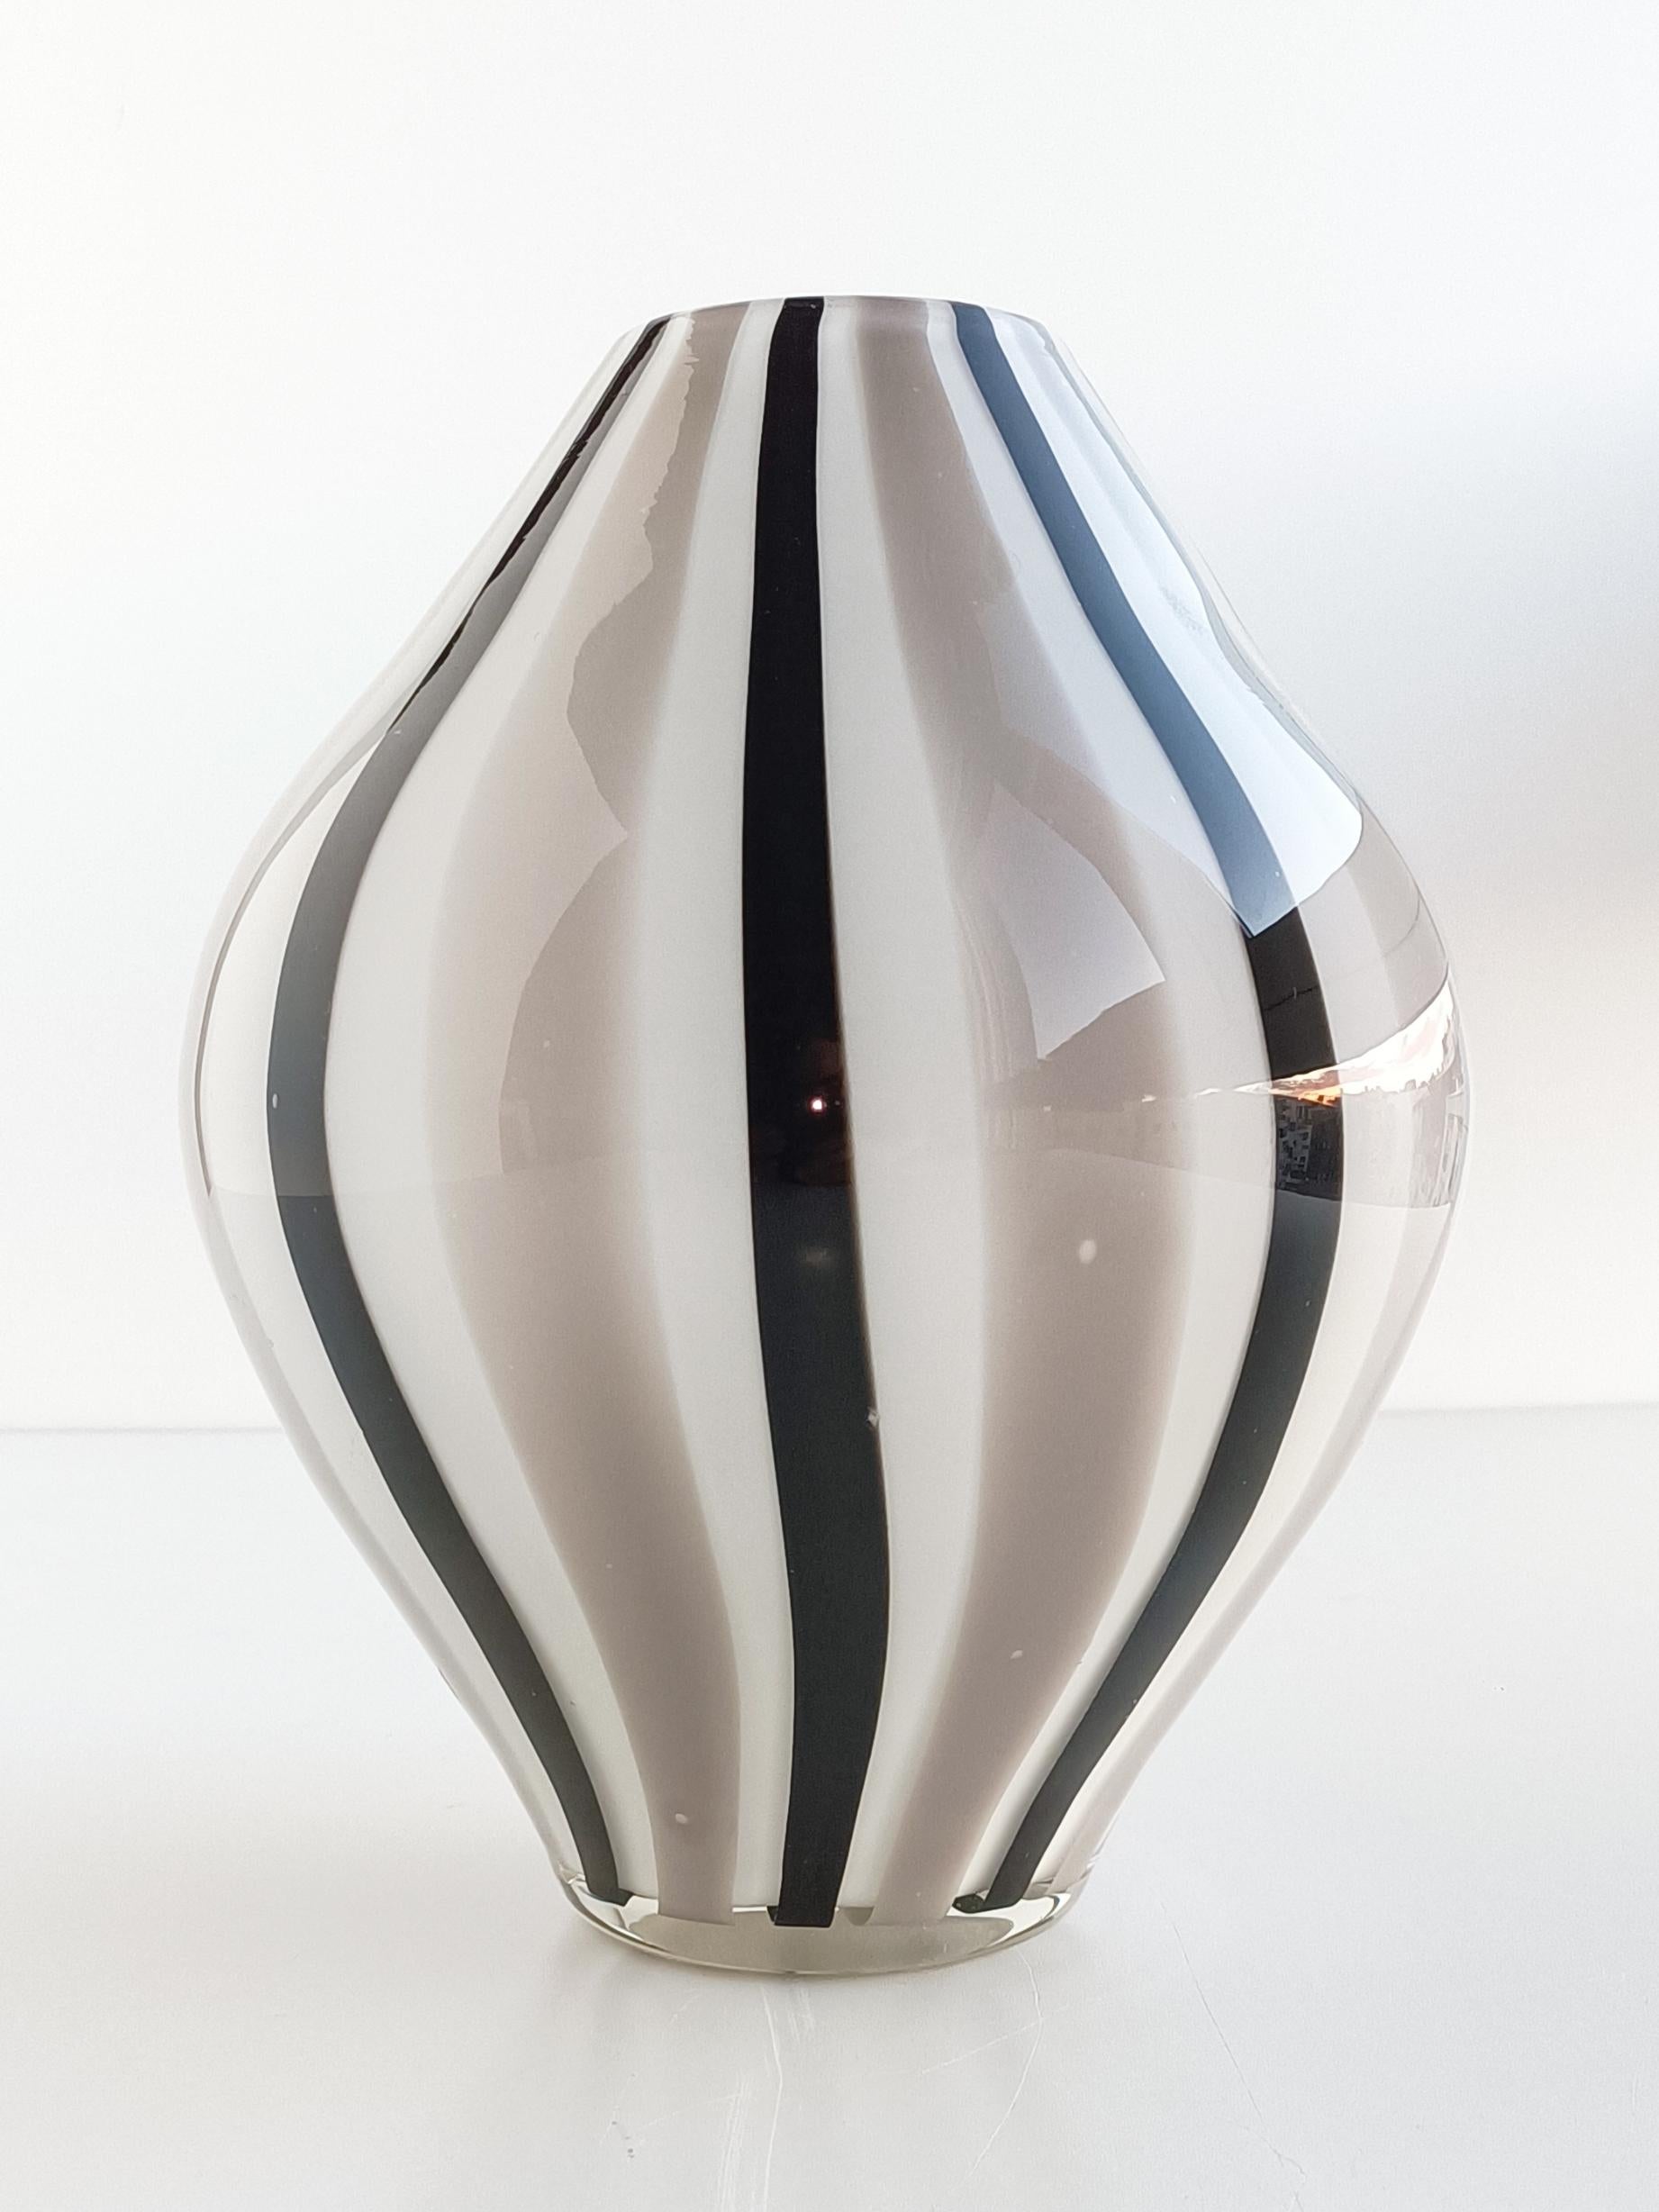 Explore the exquisite beauty of a vintage Murano glass vase. Featuring a very graphic unique striped decor in white, gray and black, this stunning piece will add elegance and charm to any space. 
Handcrafted in Venice, Italy, circa the 1960s.